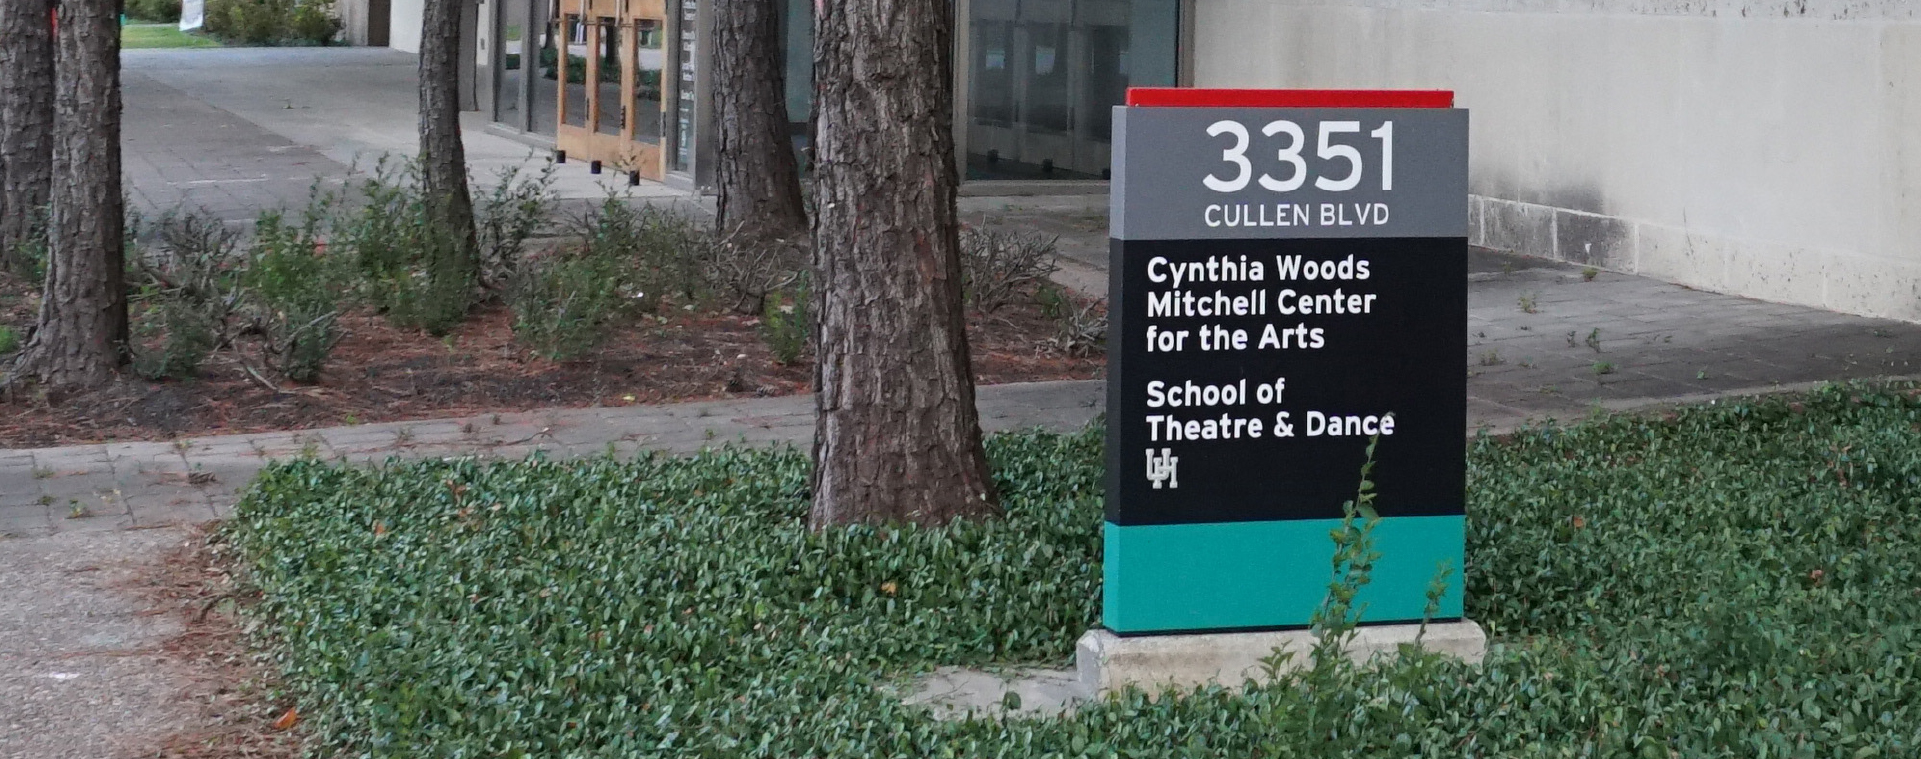 An outdoor sign surrounded by green ground cover reads from top to bottom: “3351 CULLEN BLVD.; Cynthia Woods Mitchell Center for the Arts; School of Theater & Dance; UH.”